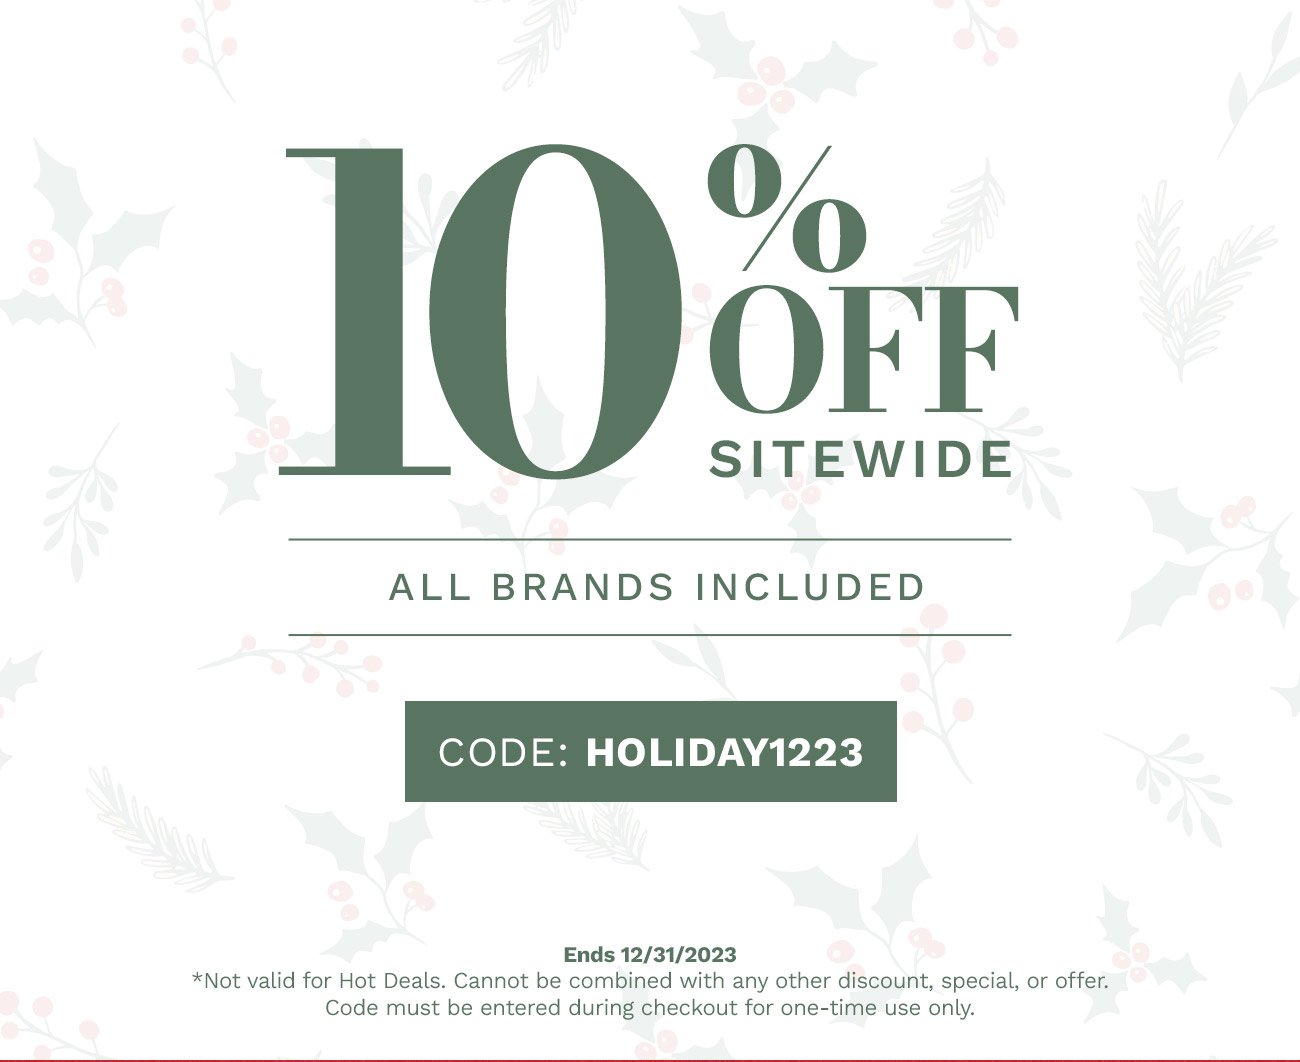 10% OFF SITEWIDE. ALL BRANDS INCLUDED. CODE:HOLIDAY1223.